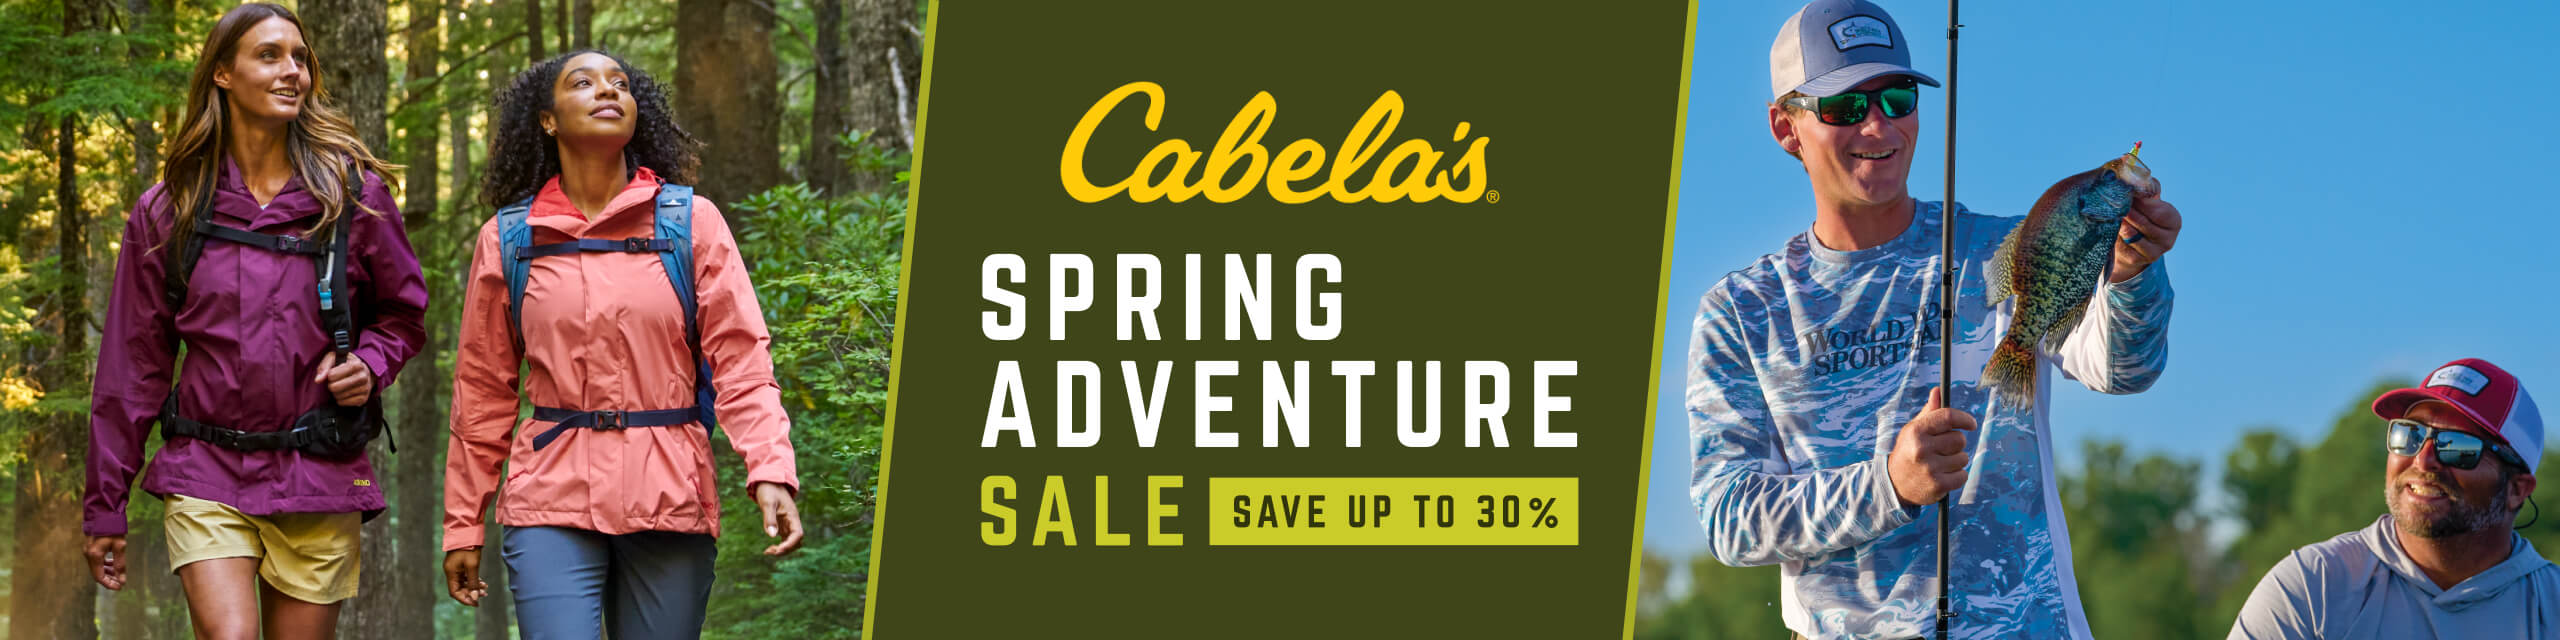 Green cabelas outfitters hunting - Gem